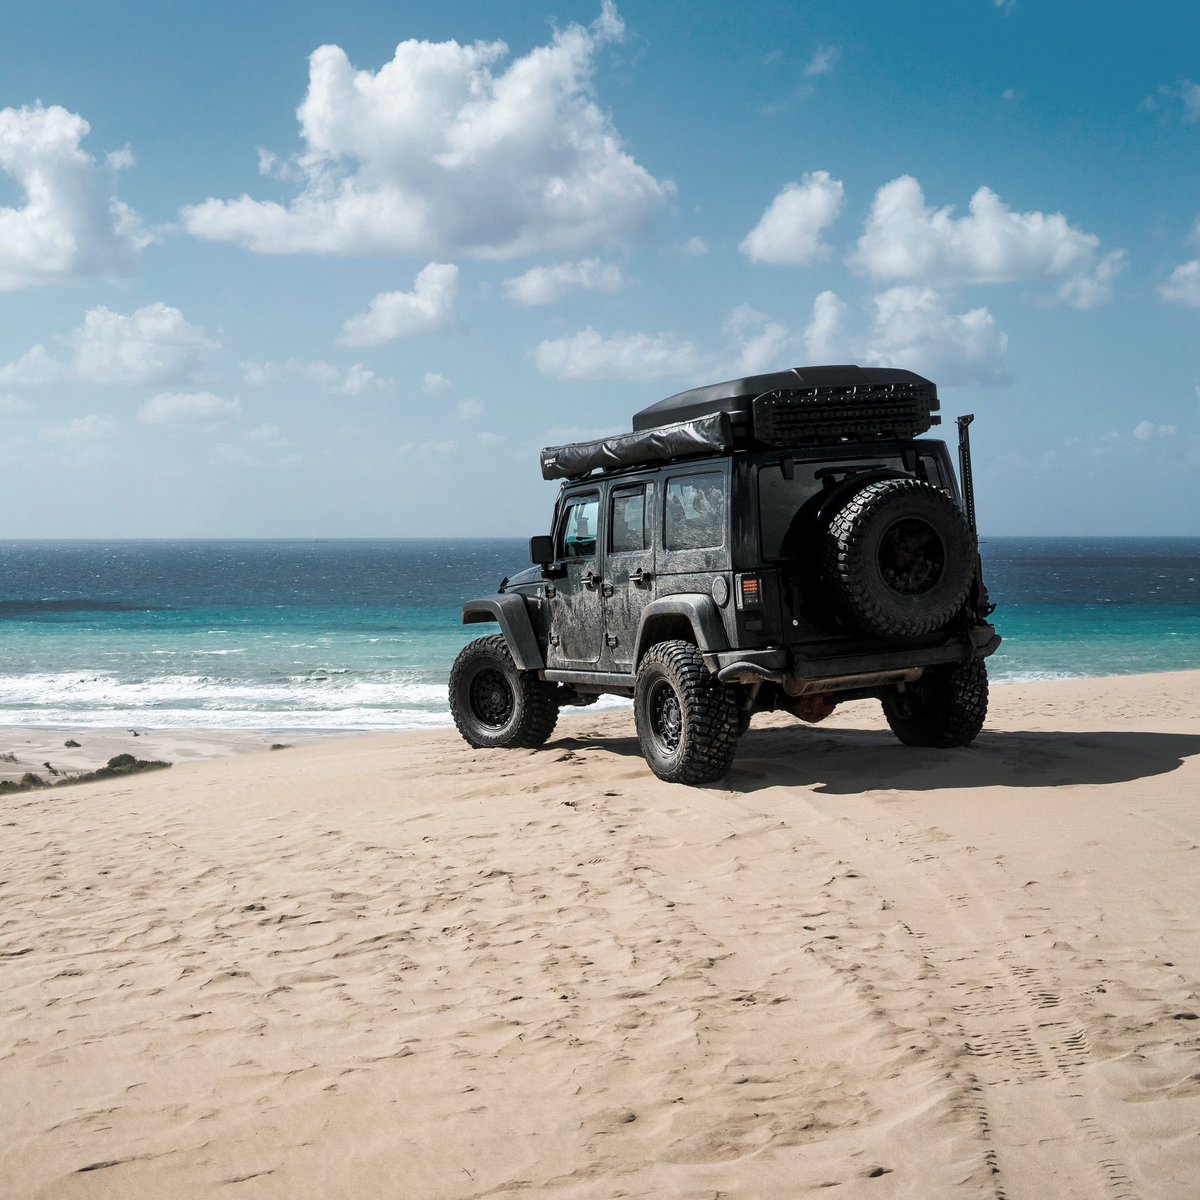 Time to turn on your Out of Office reply. 

#prometheusdesignwerx #betheoutsider #spring2024 #weekend #getoutthere #overland #jeep #camping #baja  #beachcamping #surfing #dive #fishing #seetheworld #adventureanywhere #pdw4life